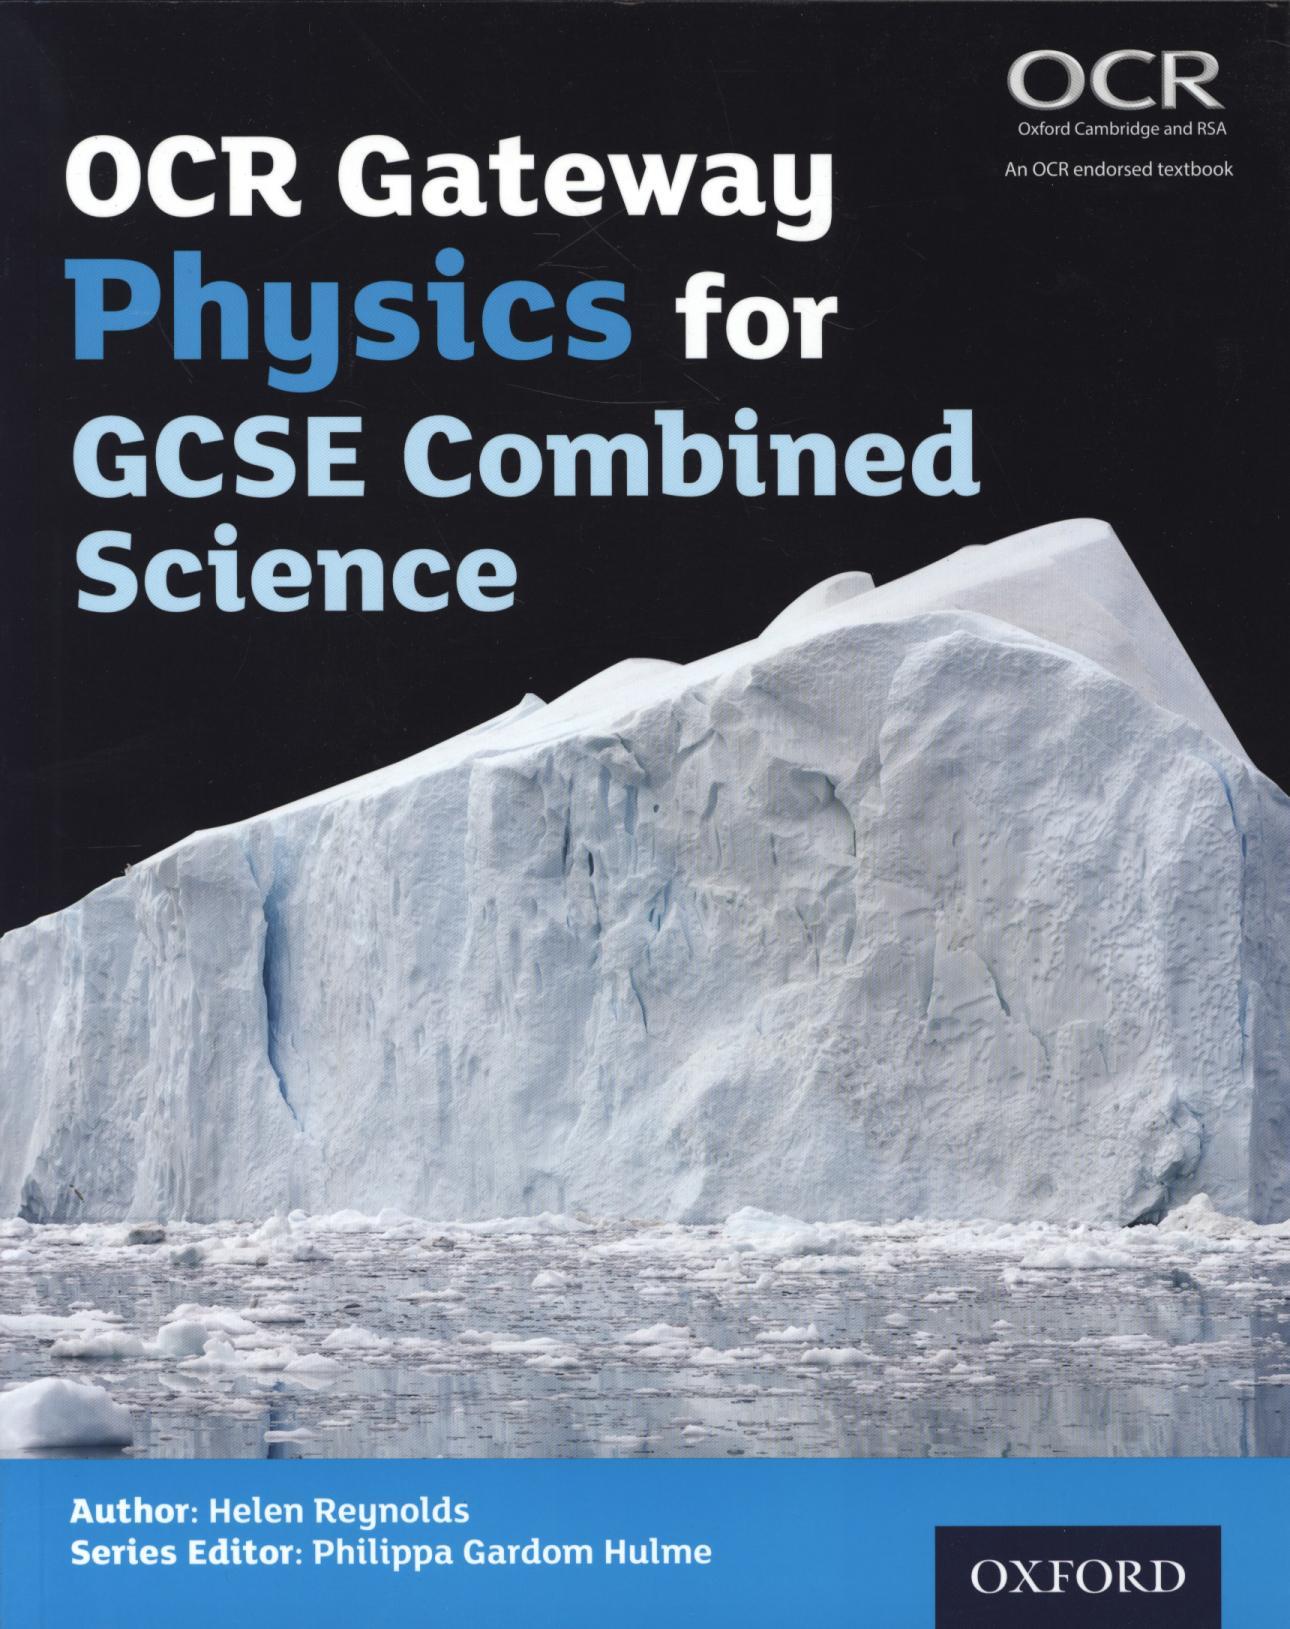 OCR Gateway Physics for GCSE Combined Science Student Book